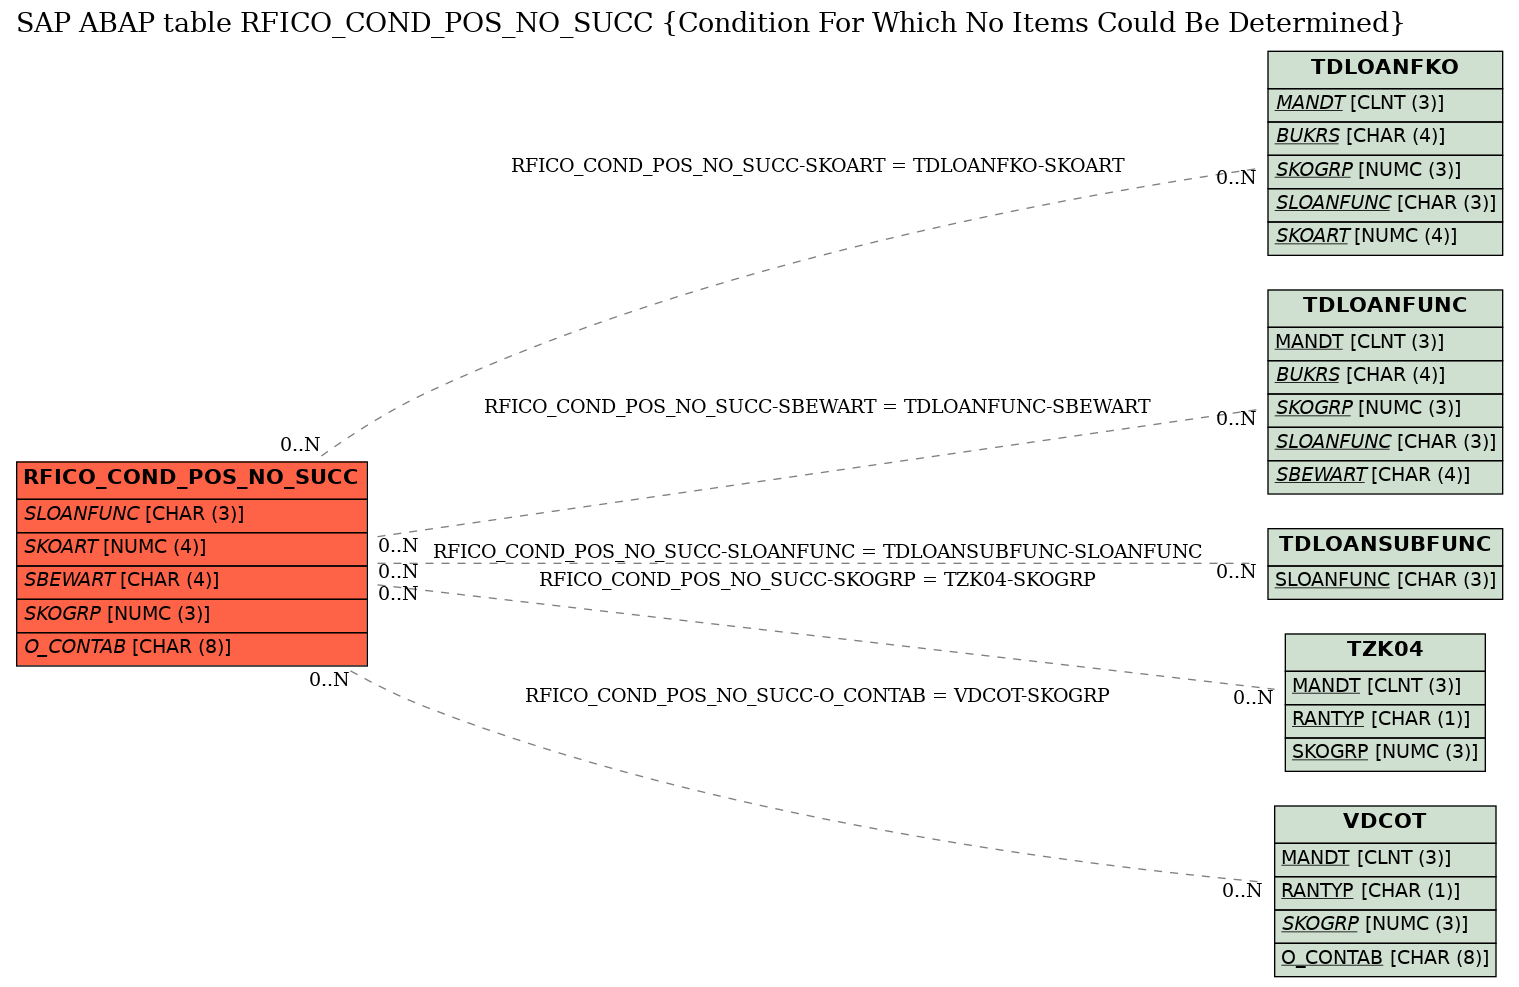 E-R Diagram for table RFICO_COND_POS_NO_SUCC (Condition For Which No Items Could Be Determined)